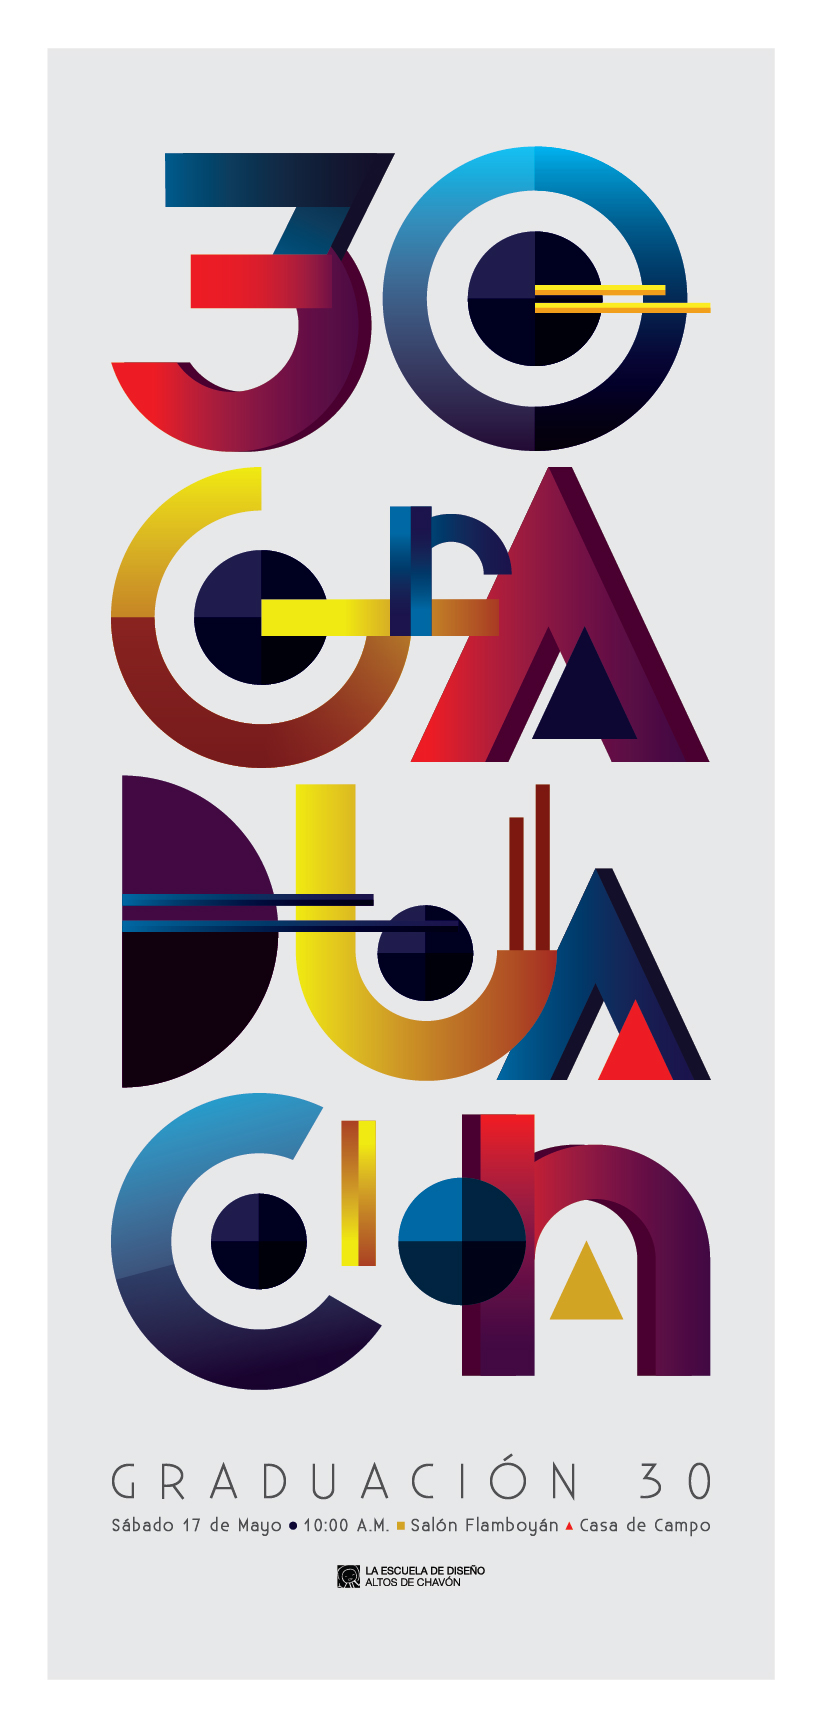 graduation poster type shapes circle triangle square russian Suprematism